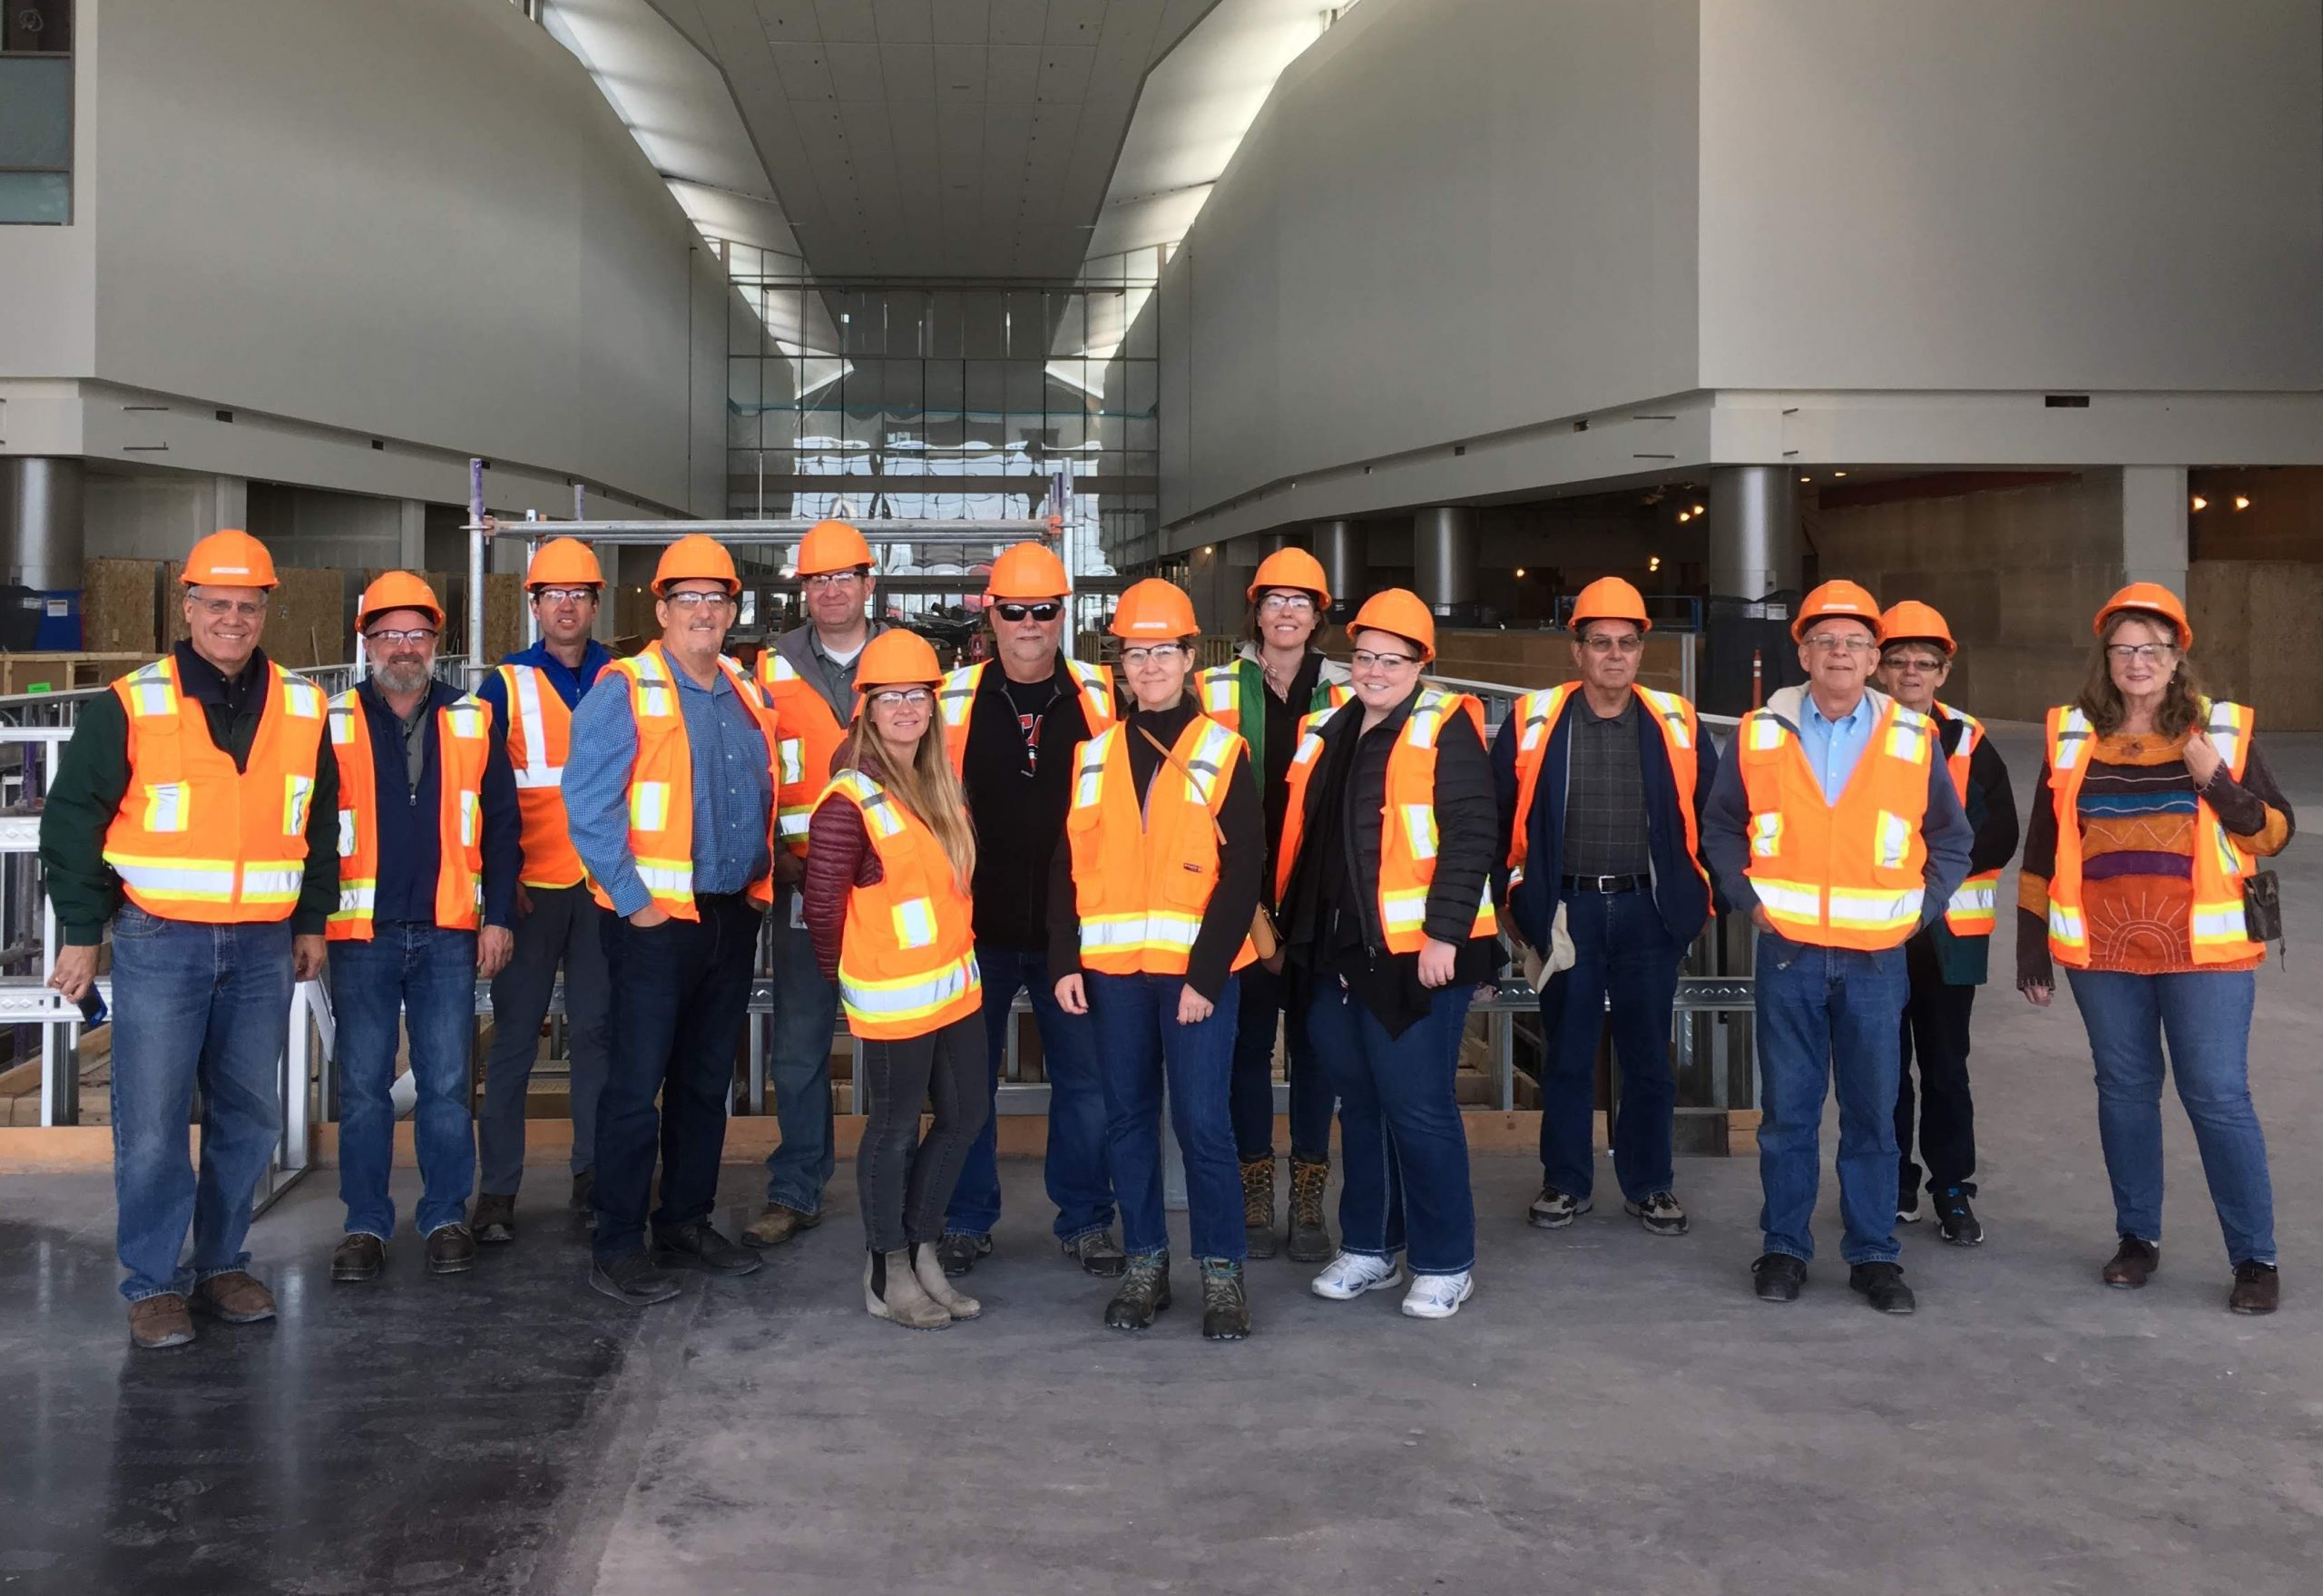 USSC members in safety gear inside the under-construction Salt Lake City airport.